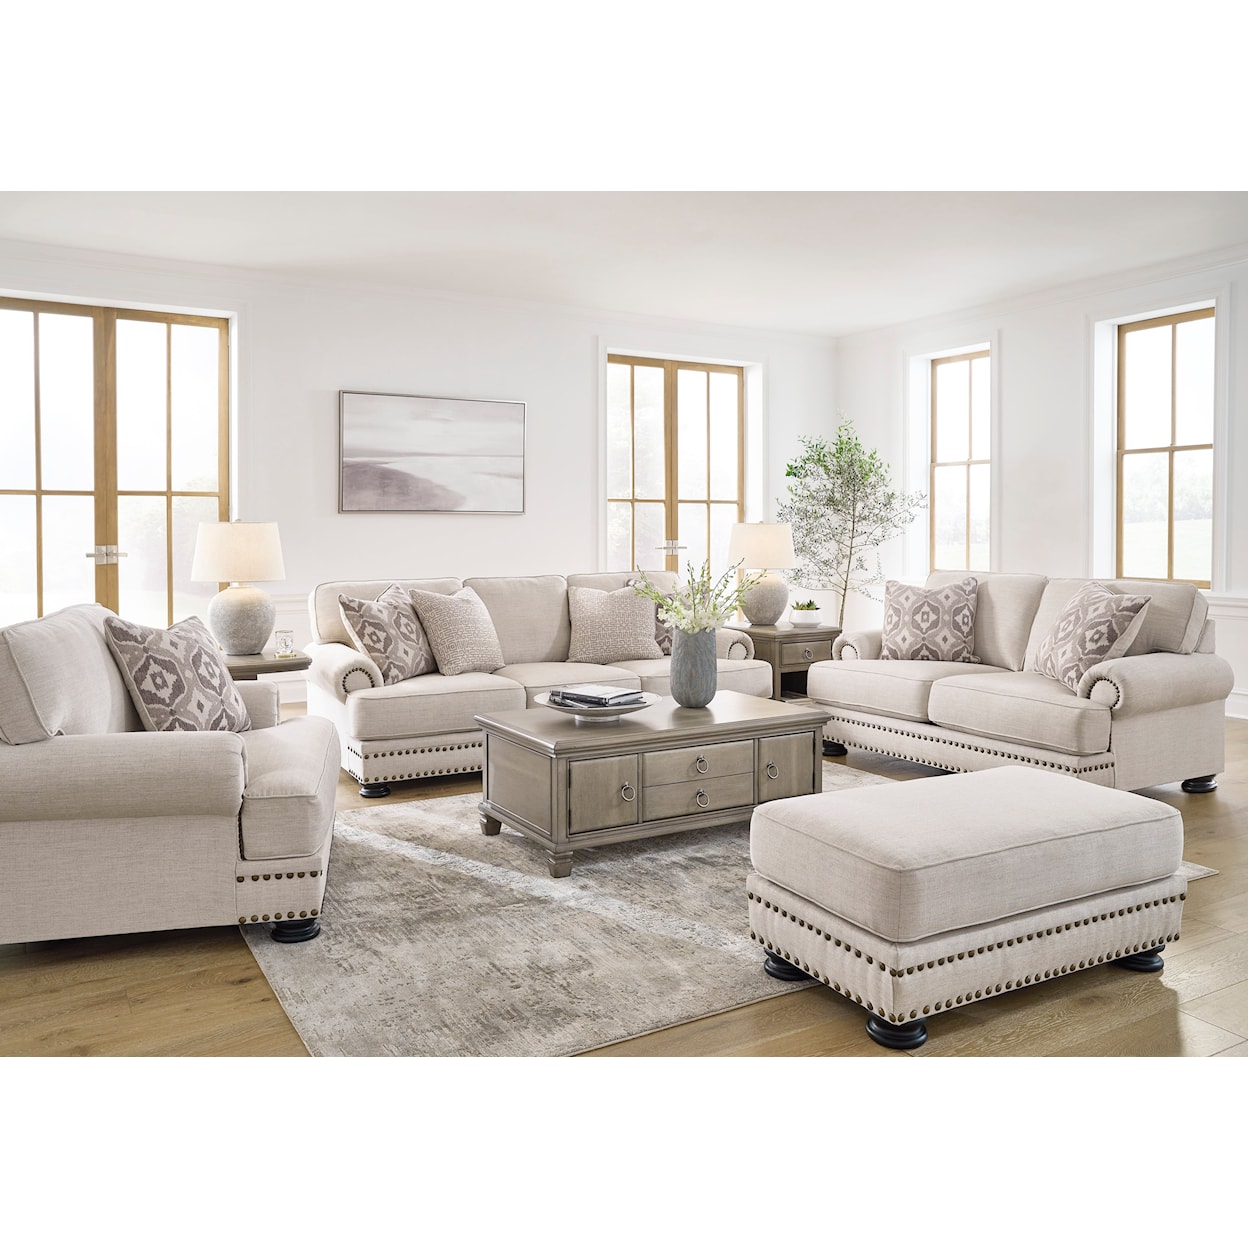 Benchcraft by Ashley Merrimore 2-Piece Living Room Set